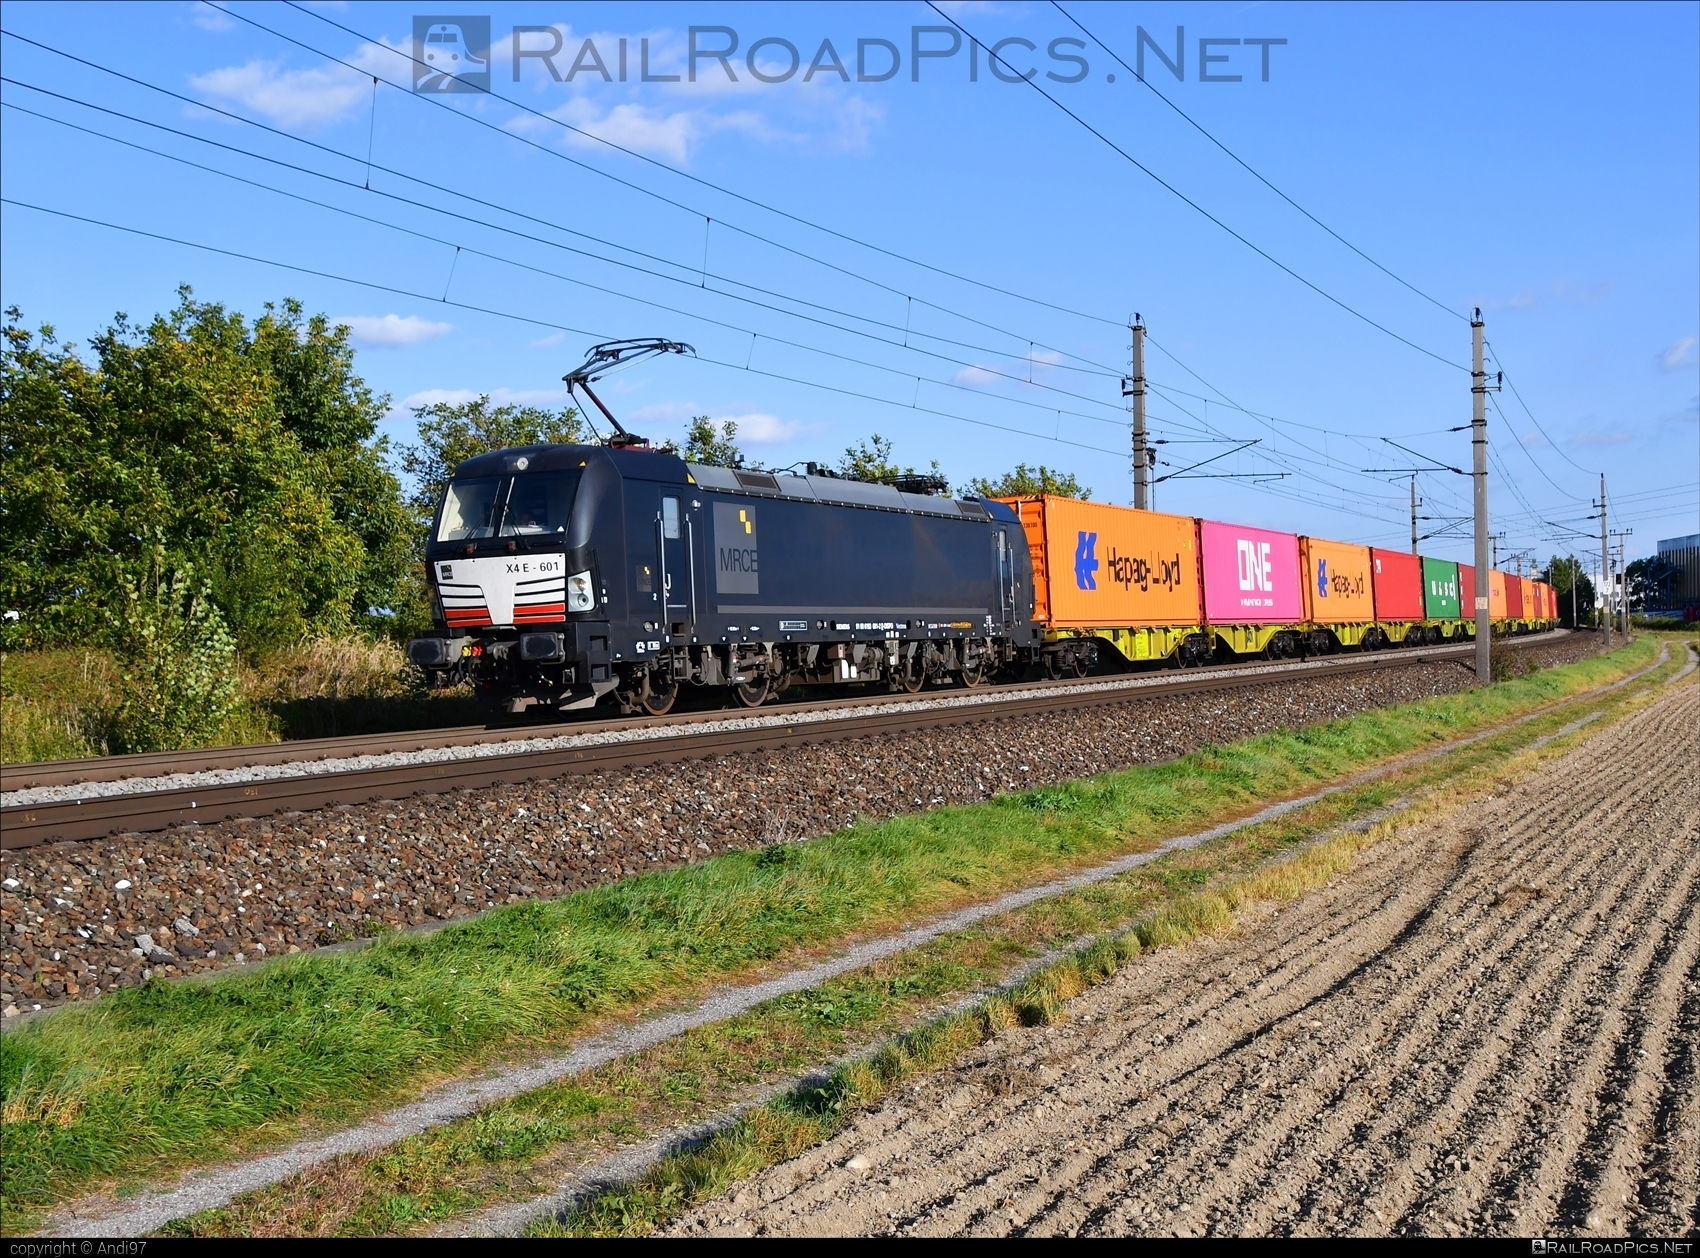 Siemens Vectron AC - 193 601 operated by Wiener Lokalbahnen Cargo GmbH #container #dispolok #flatwagon #hapaglloyd #mitsuirailcapitaleurope #mitsuirailcapitaleuropegmbh #mrce #one #siemens #siemensVectron #siemensVectronAC #vectron #vectronAC #wienerlokalbahnencargo #wienerlokalbahnencargogmbh #wlc